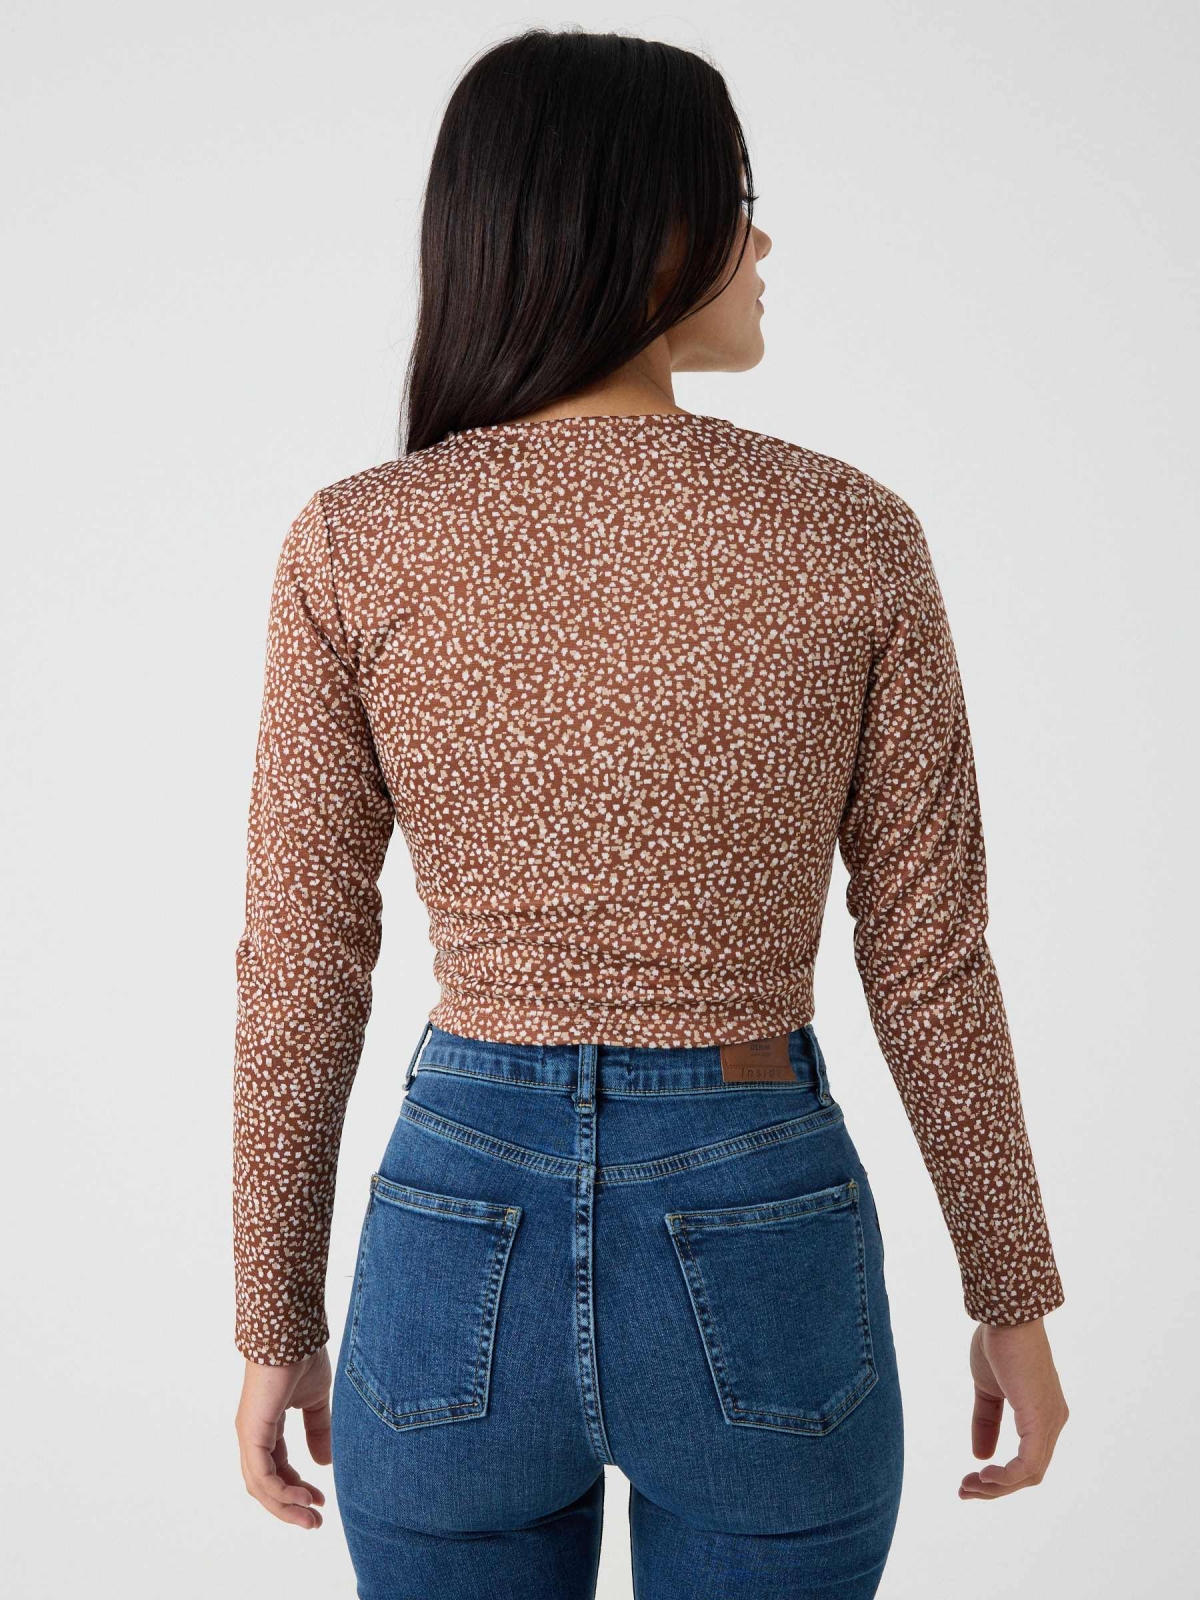 Ruffled T-shirt with print dark brown middle back view